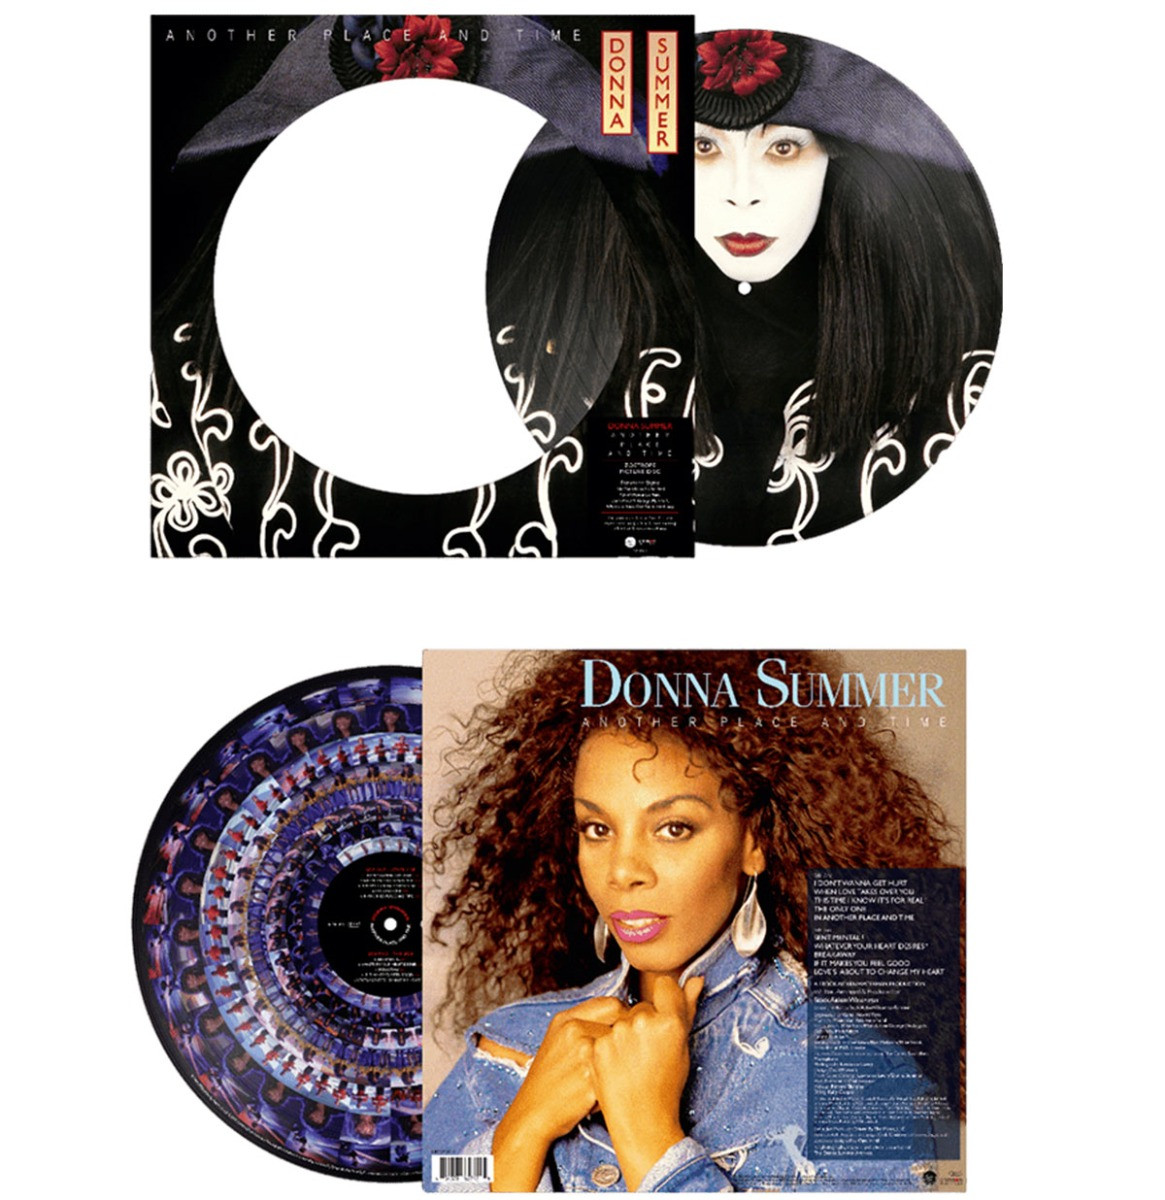 Donna Summer - Another Place And Time (Zoetrope Picture Disc) LP